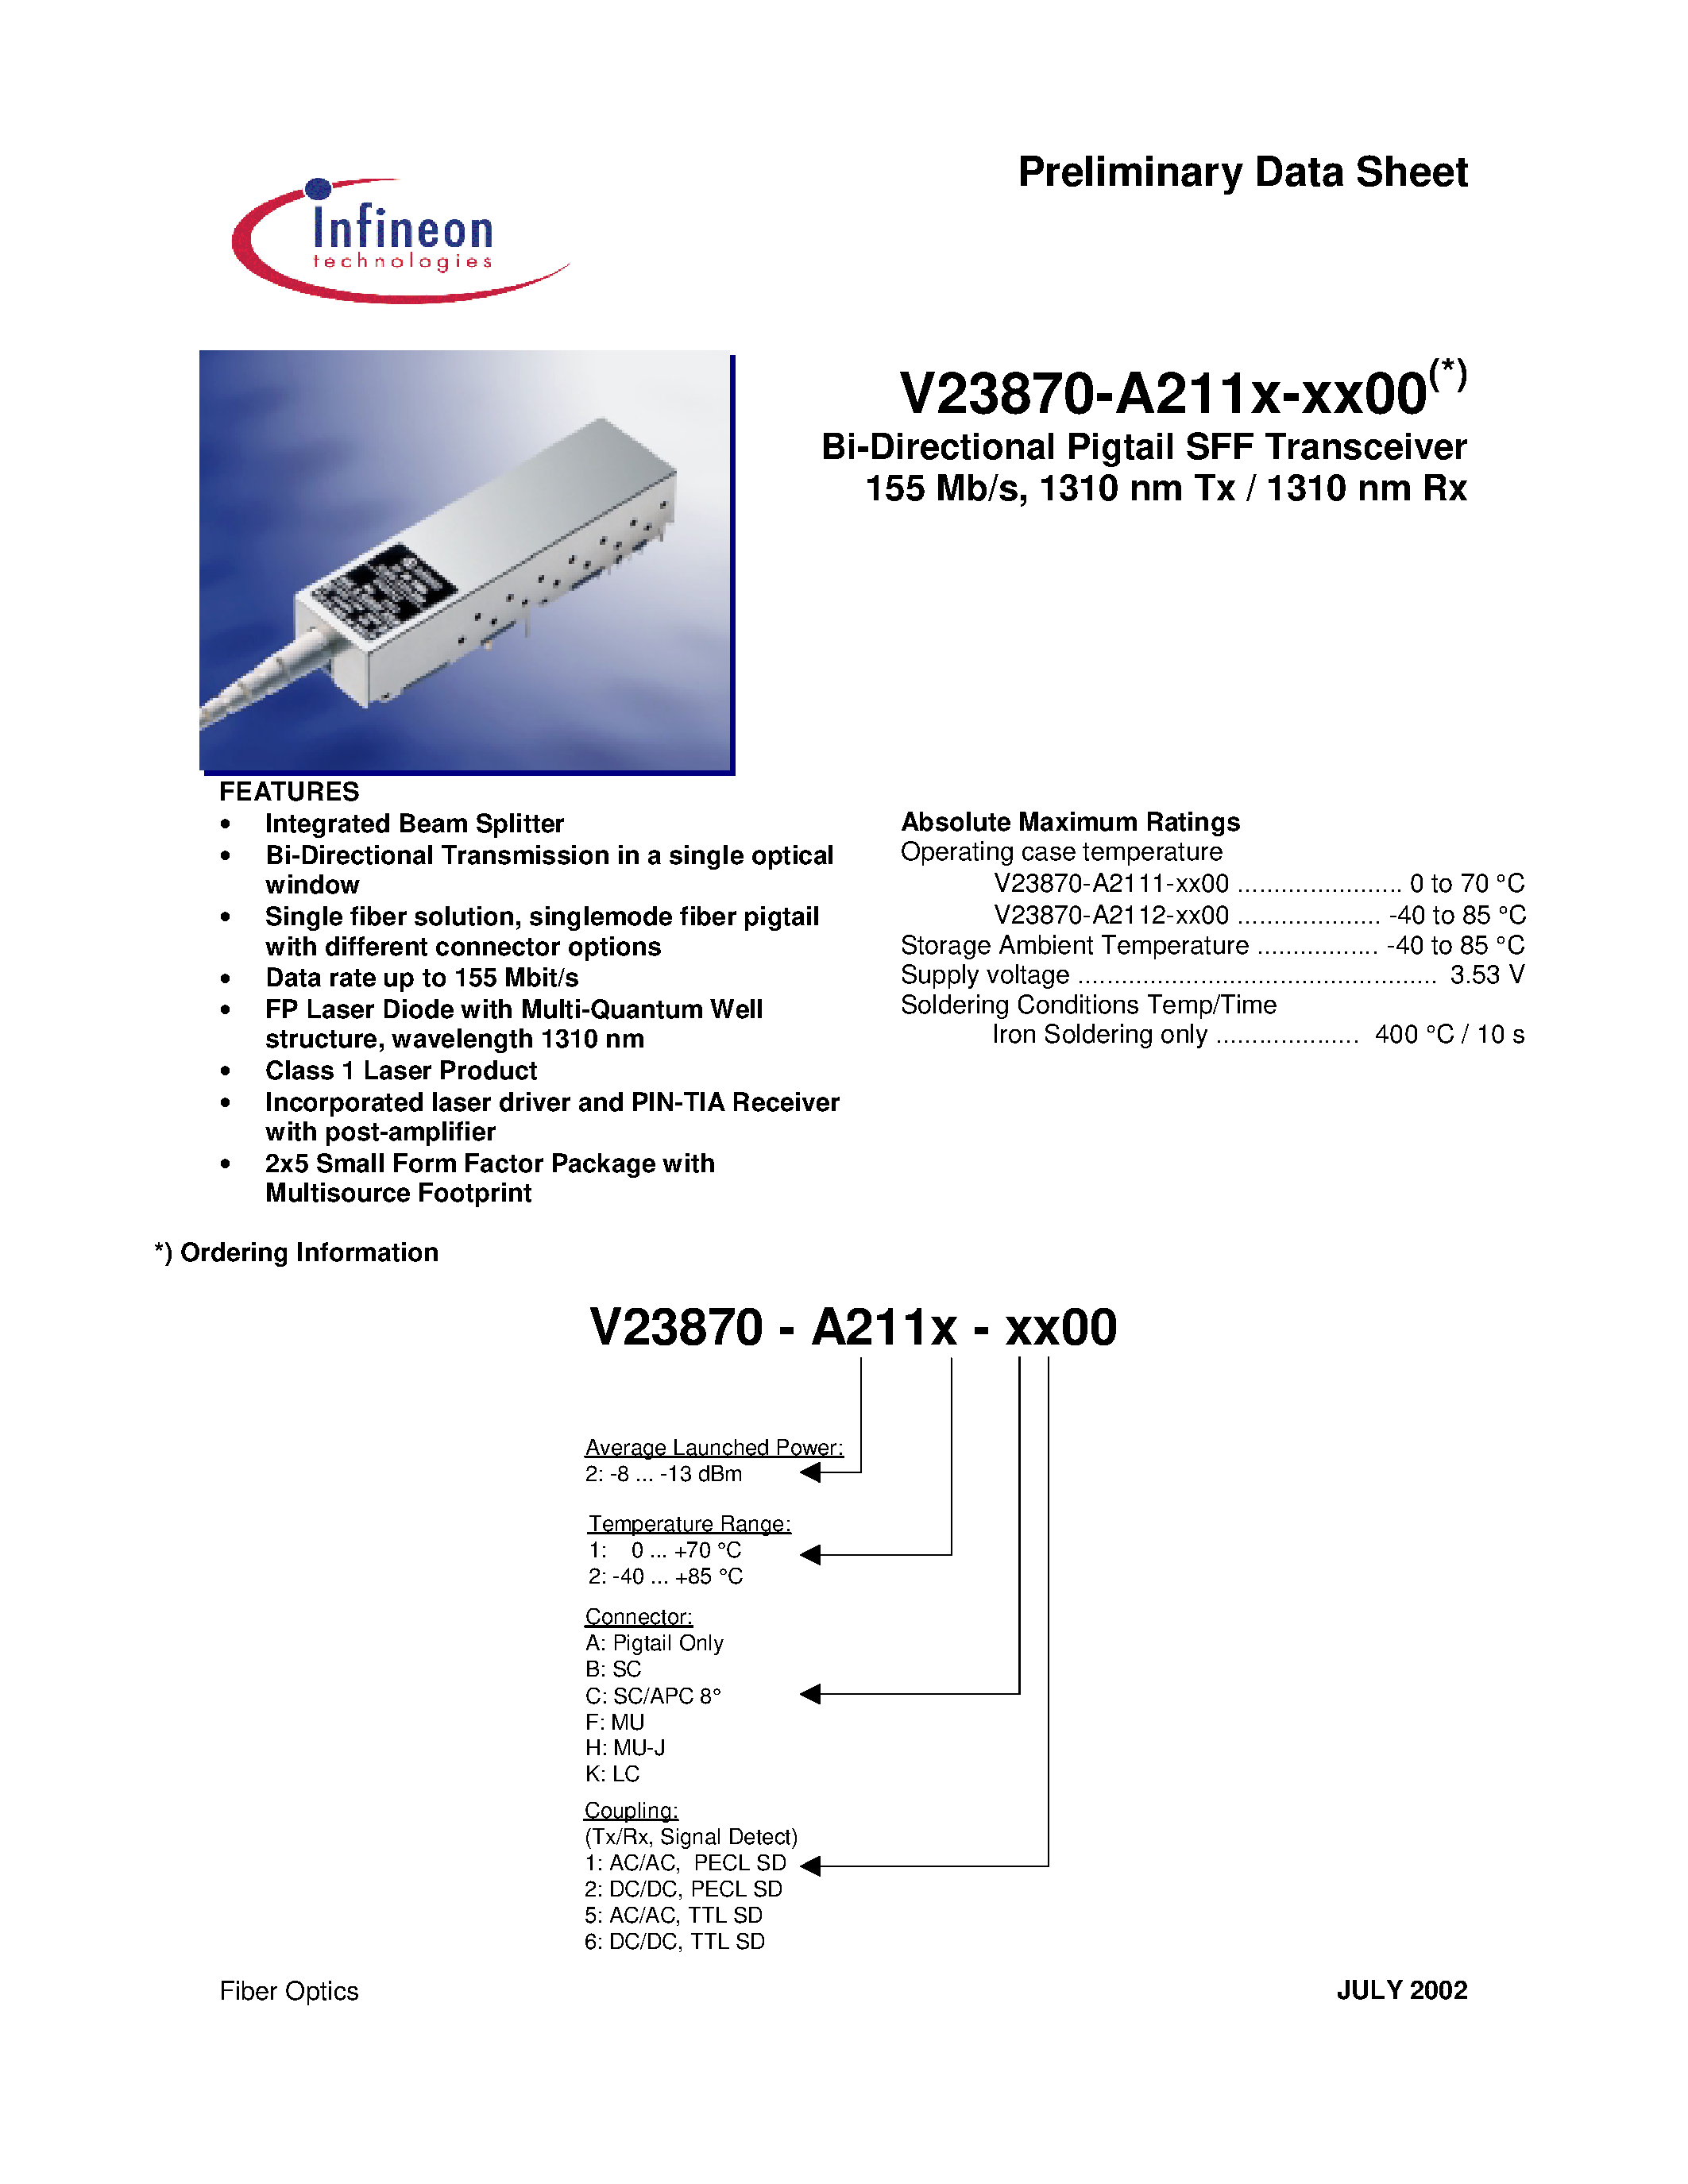 Datasheet V23870-A2111-K500 - Bi-Directional Pigtail SFF Transceiver 155 Mb/s/ 1310 nm Tx / 1310 nm Rx page 1